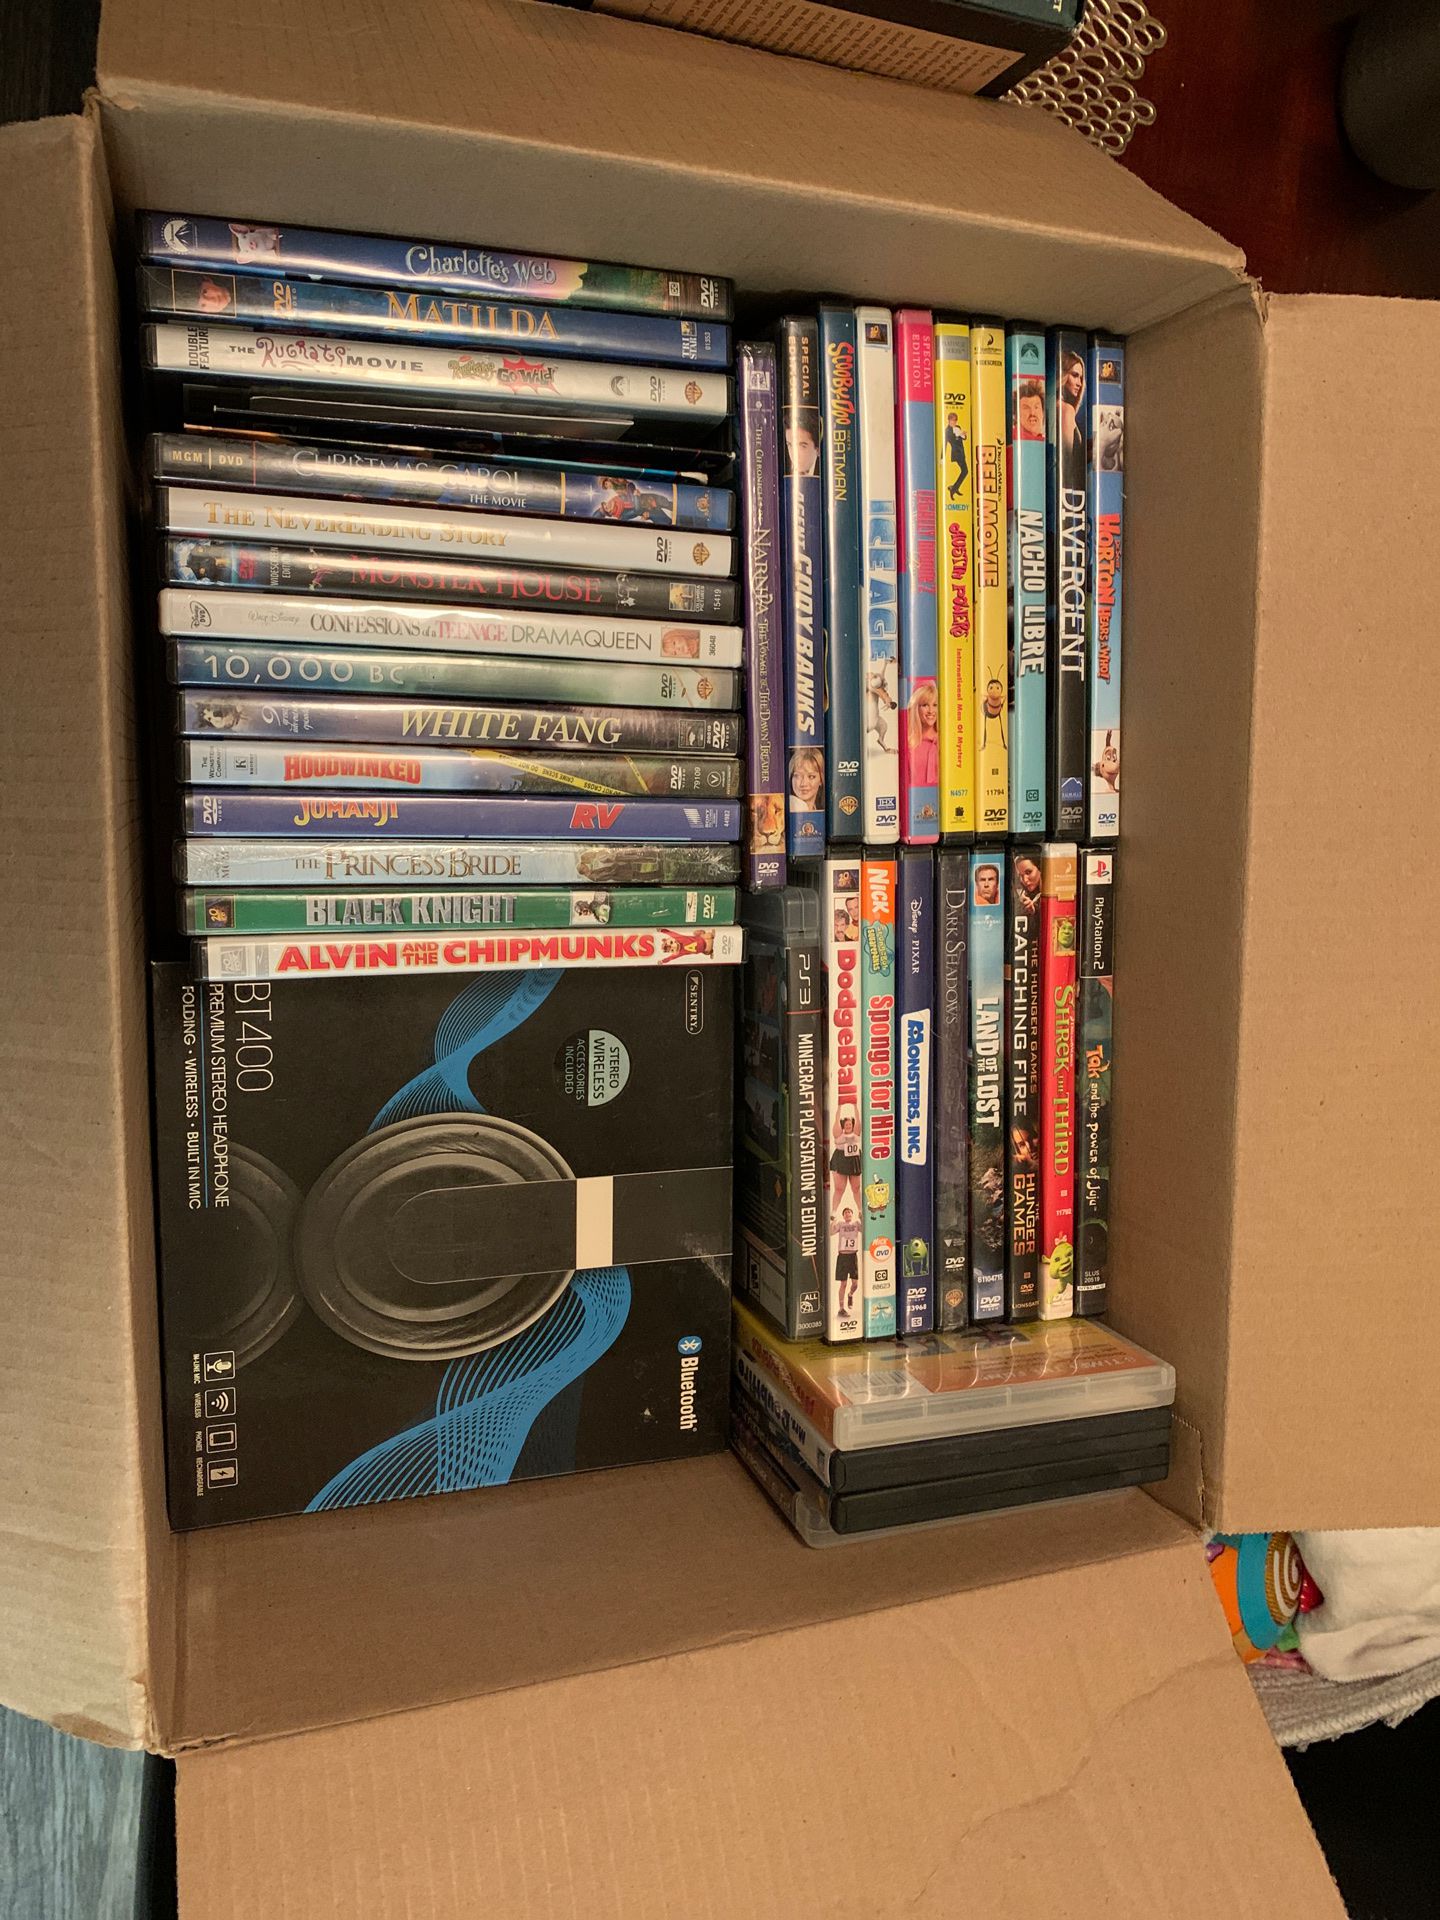 Misc dvds/games and Bluetooth headphones